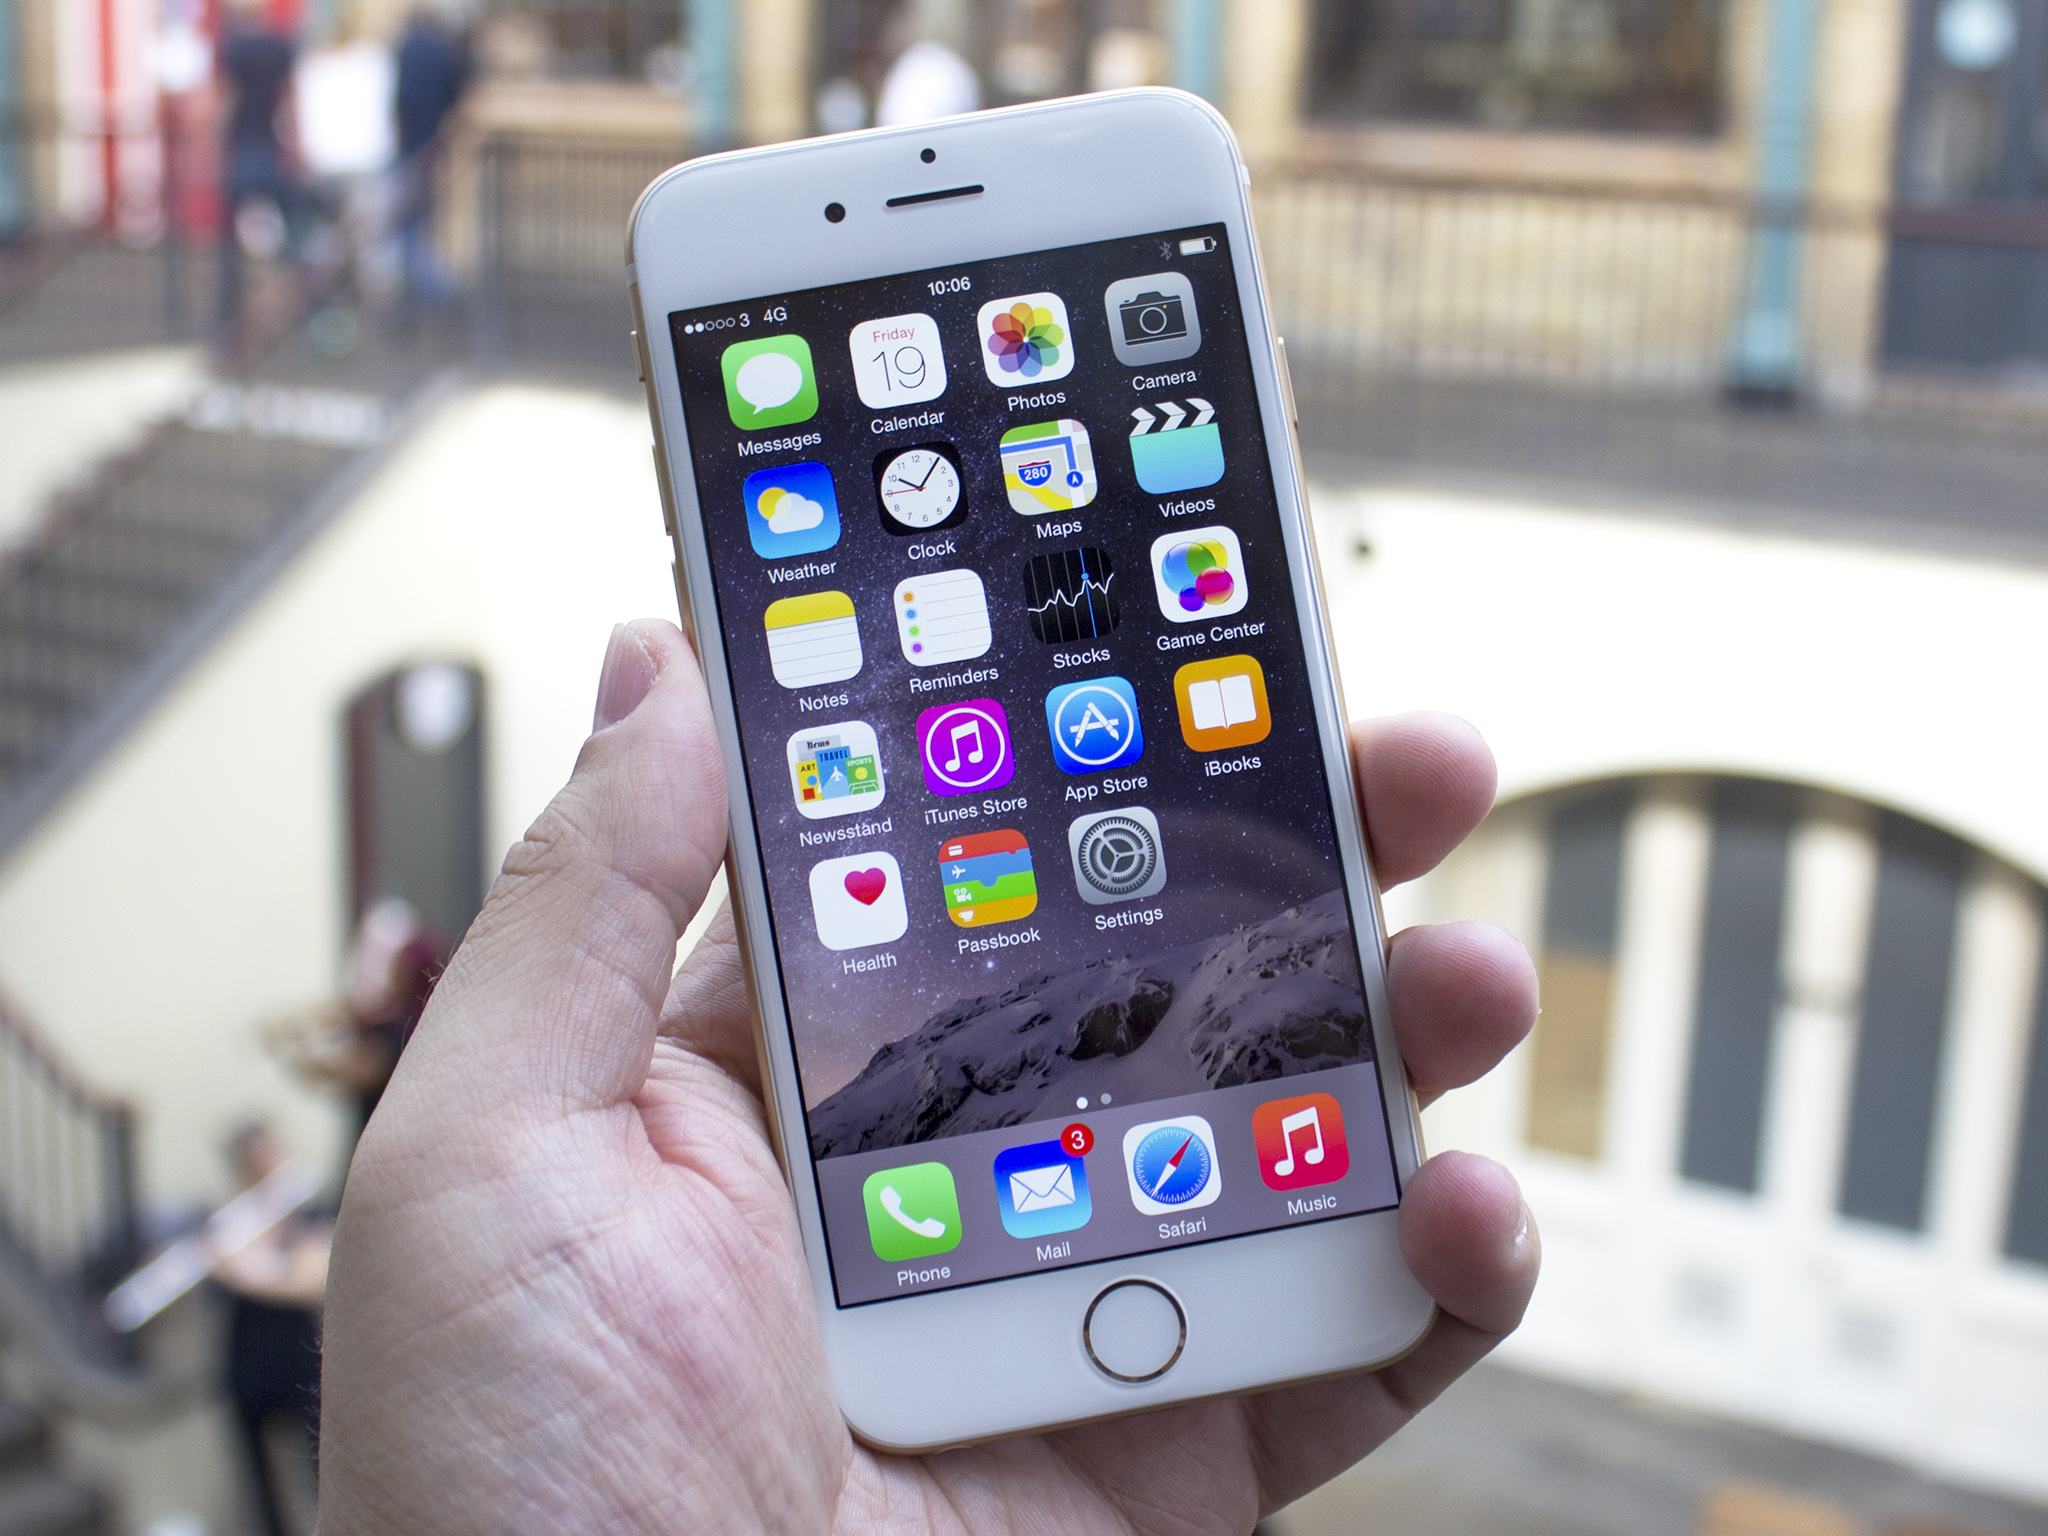 Improved bonded glass makes for a striking iPhone 6 display